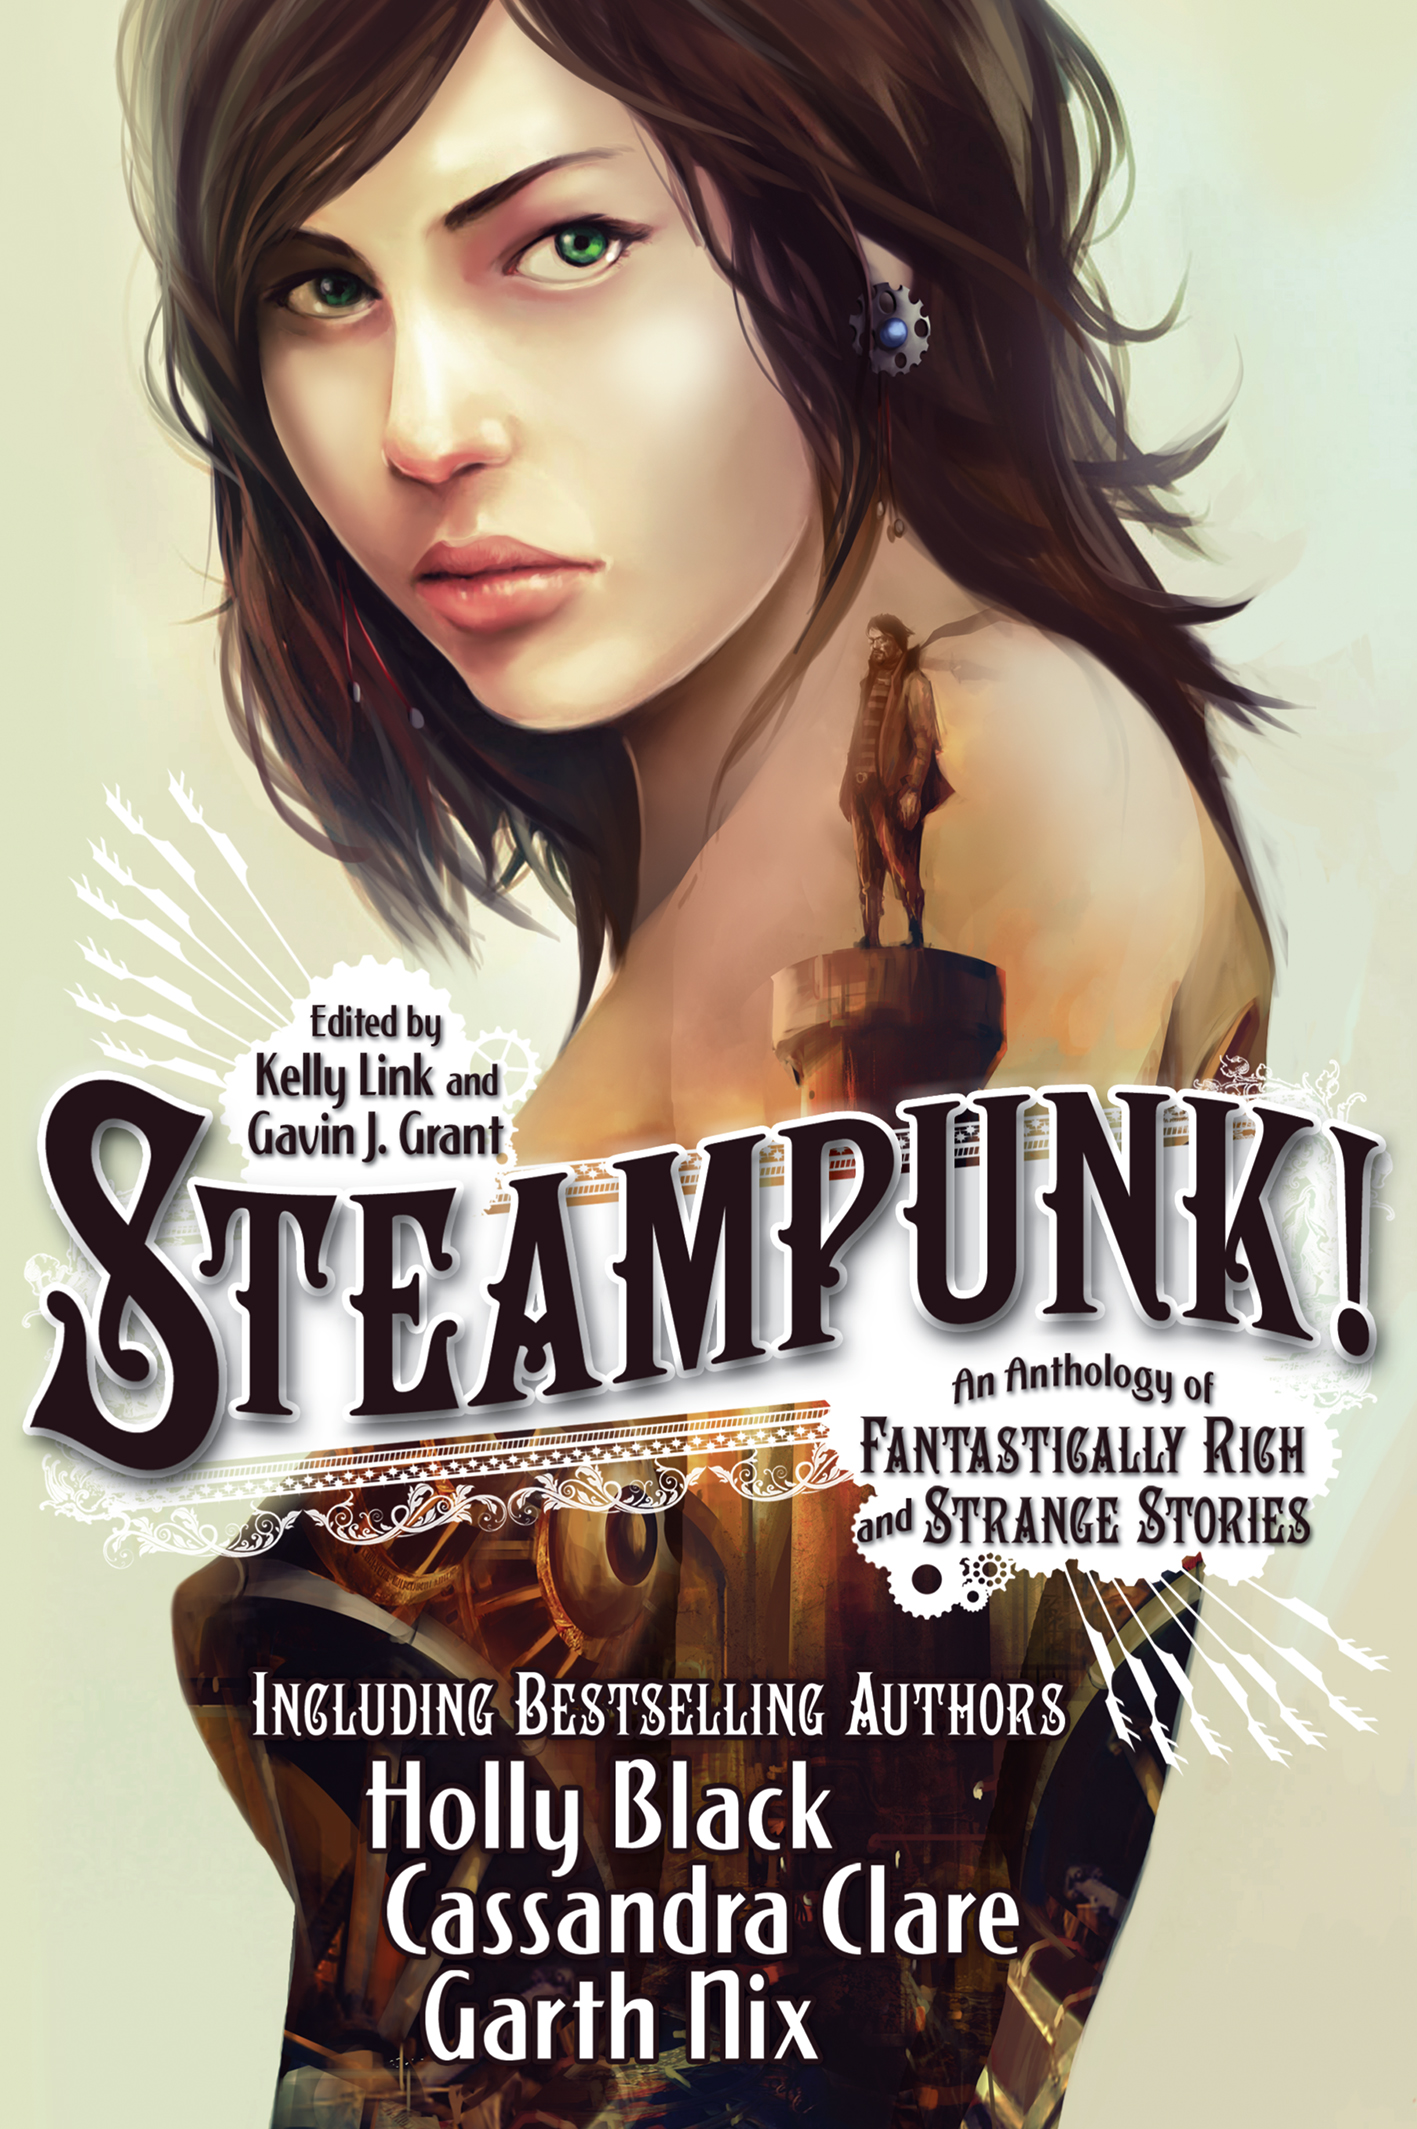 Steampunk-An-Anthology-of-Fantastically-Rich-and-Strange-Stories